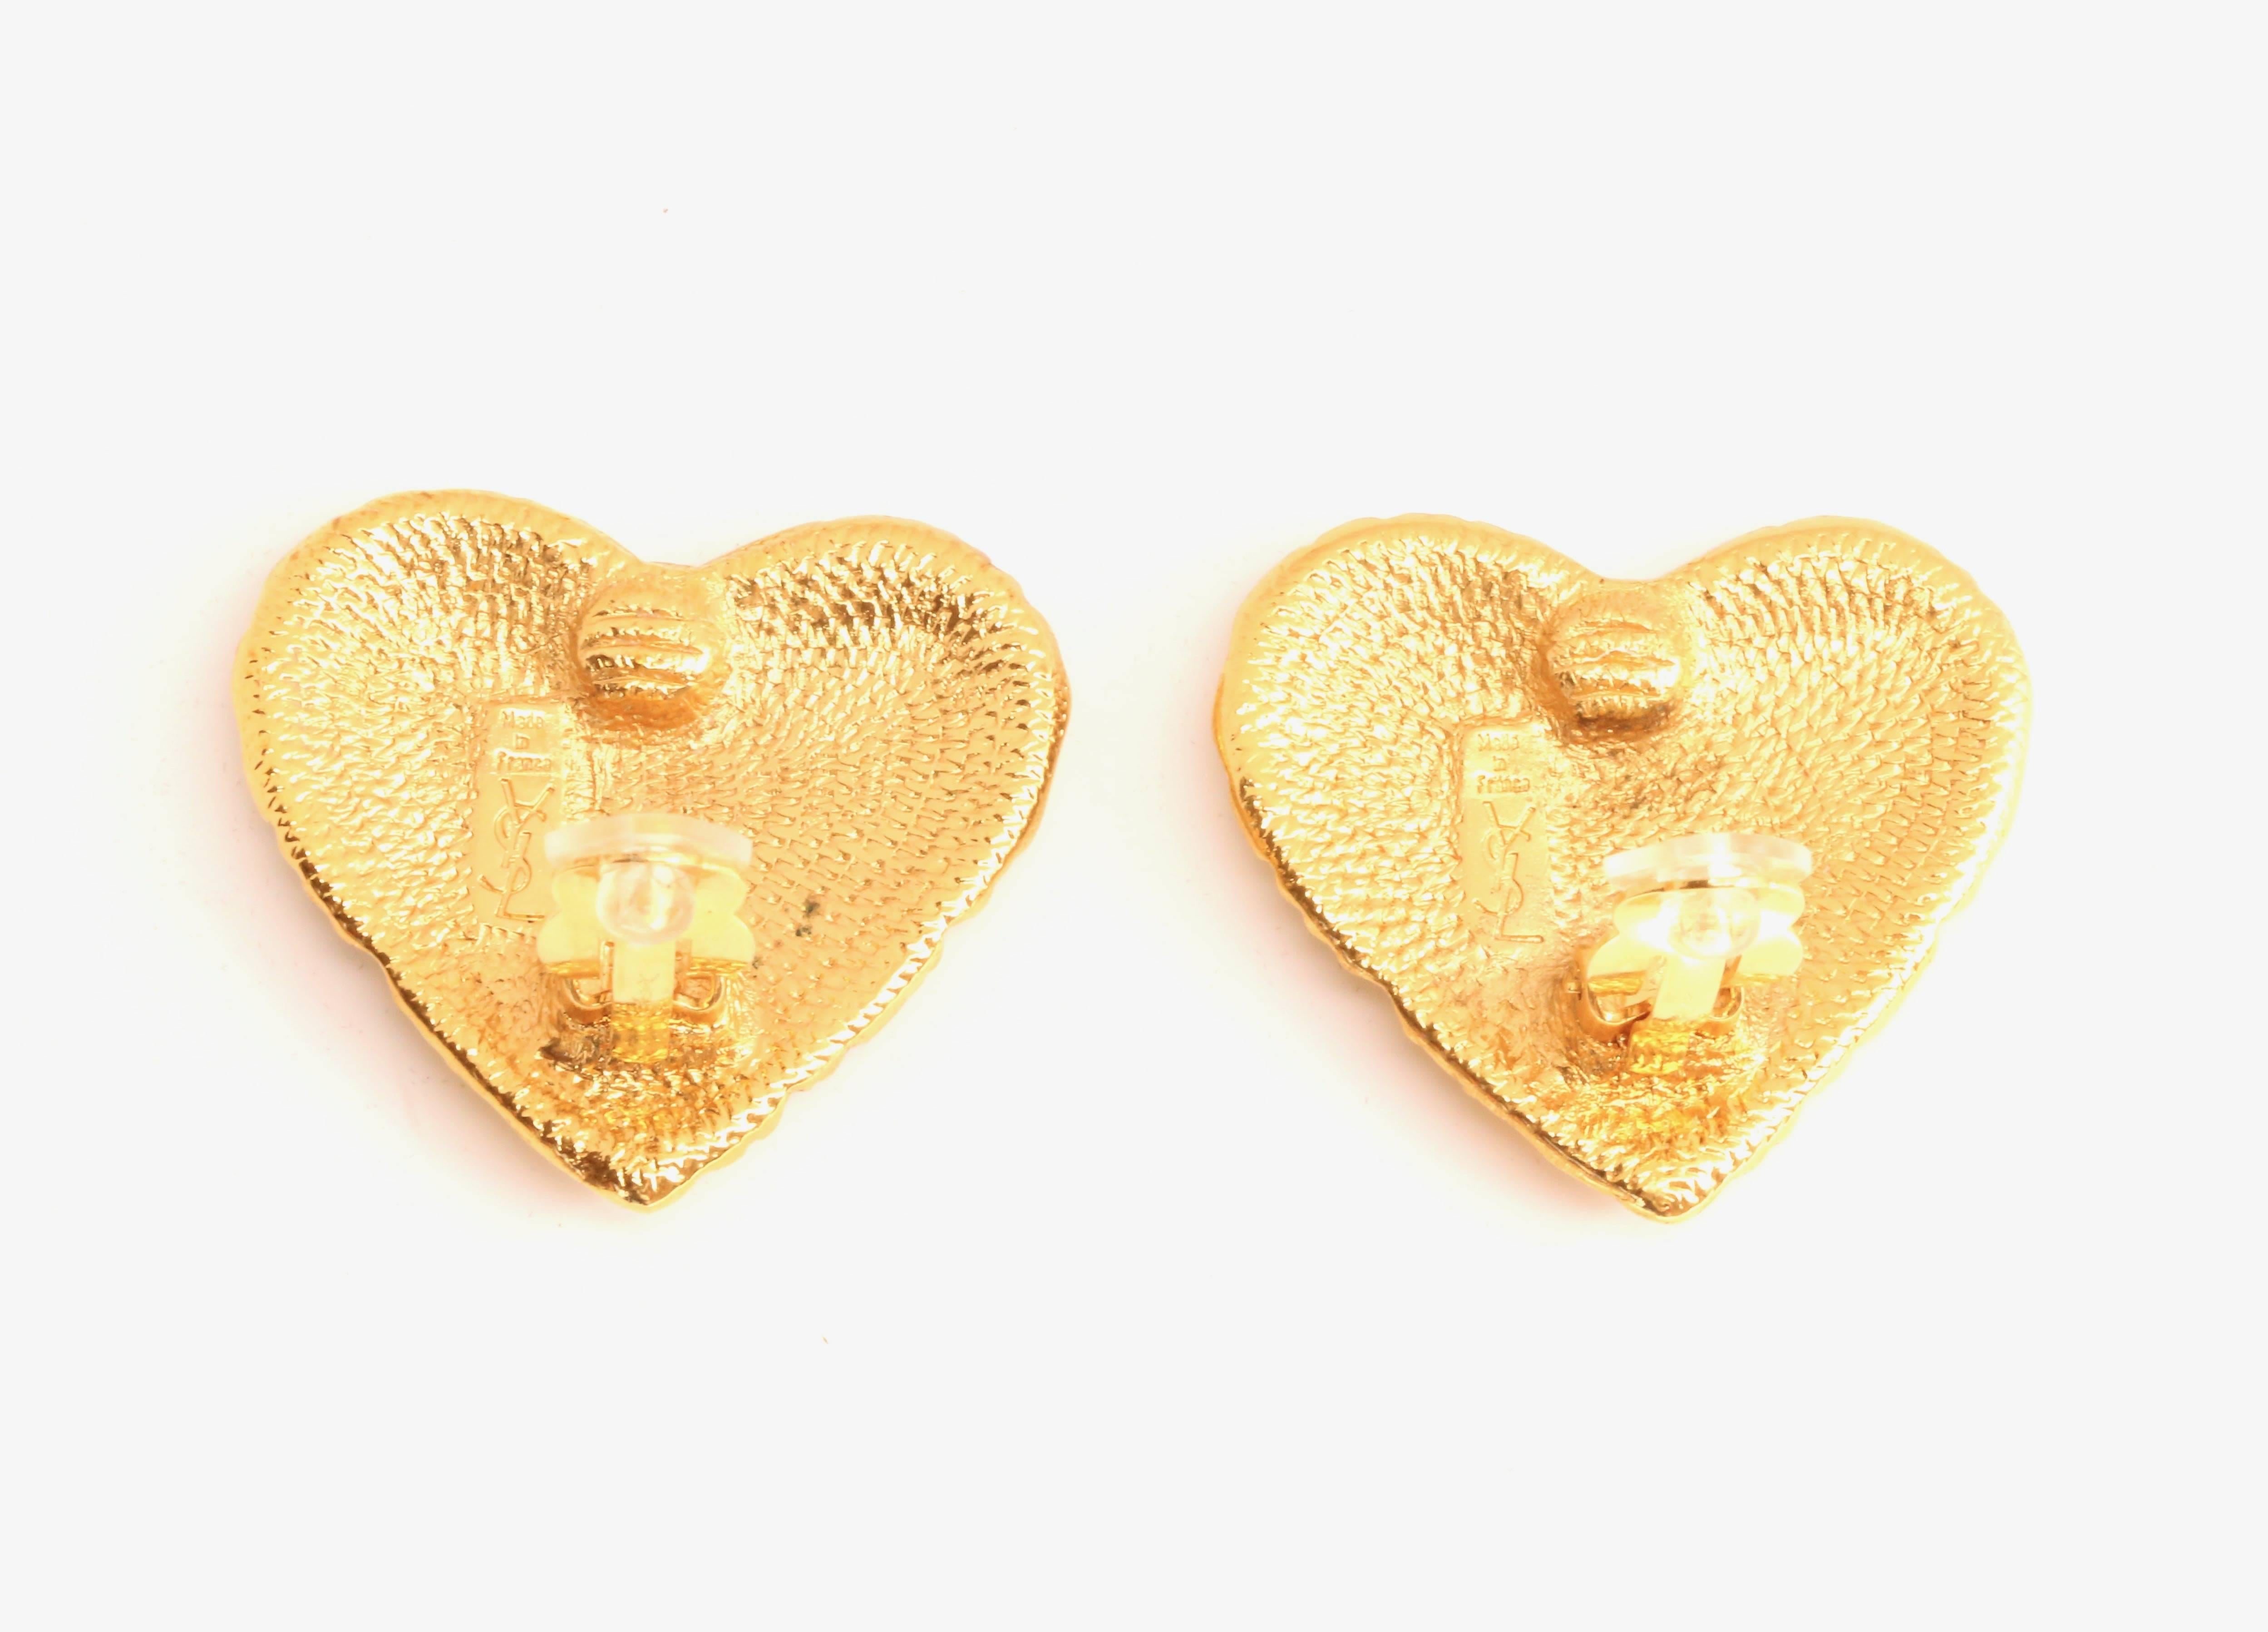 Gilt textured heart shaped earrings from Yves Saint Laurent dating to the 1980's. Clip backs. Measure approximately 1.5